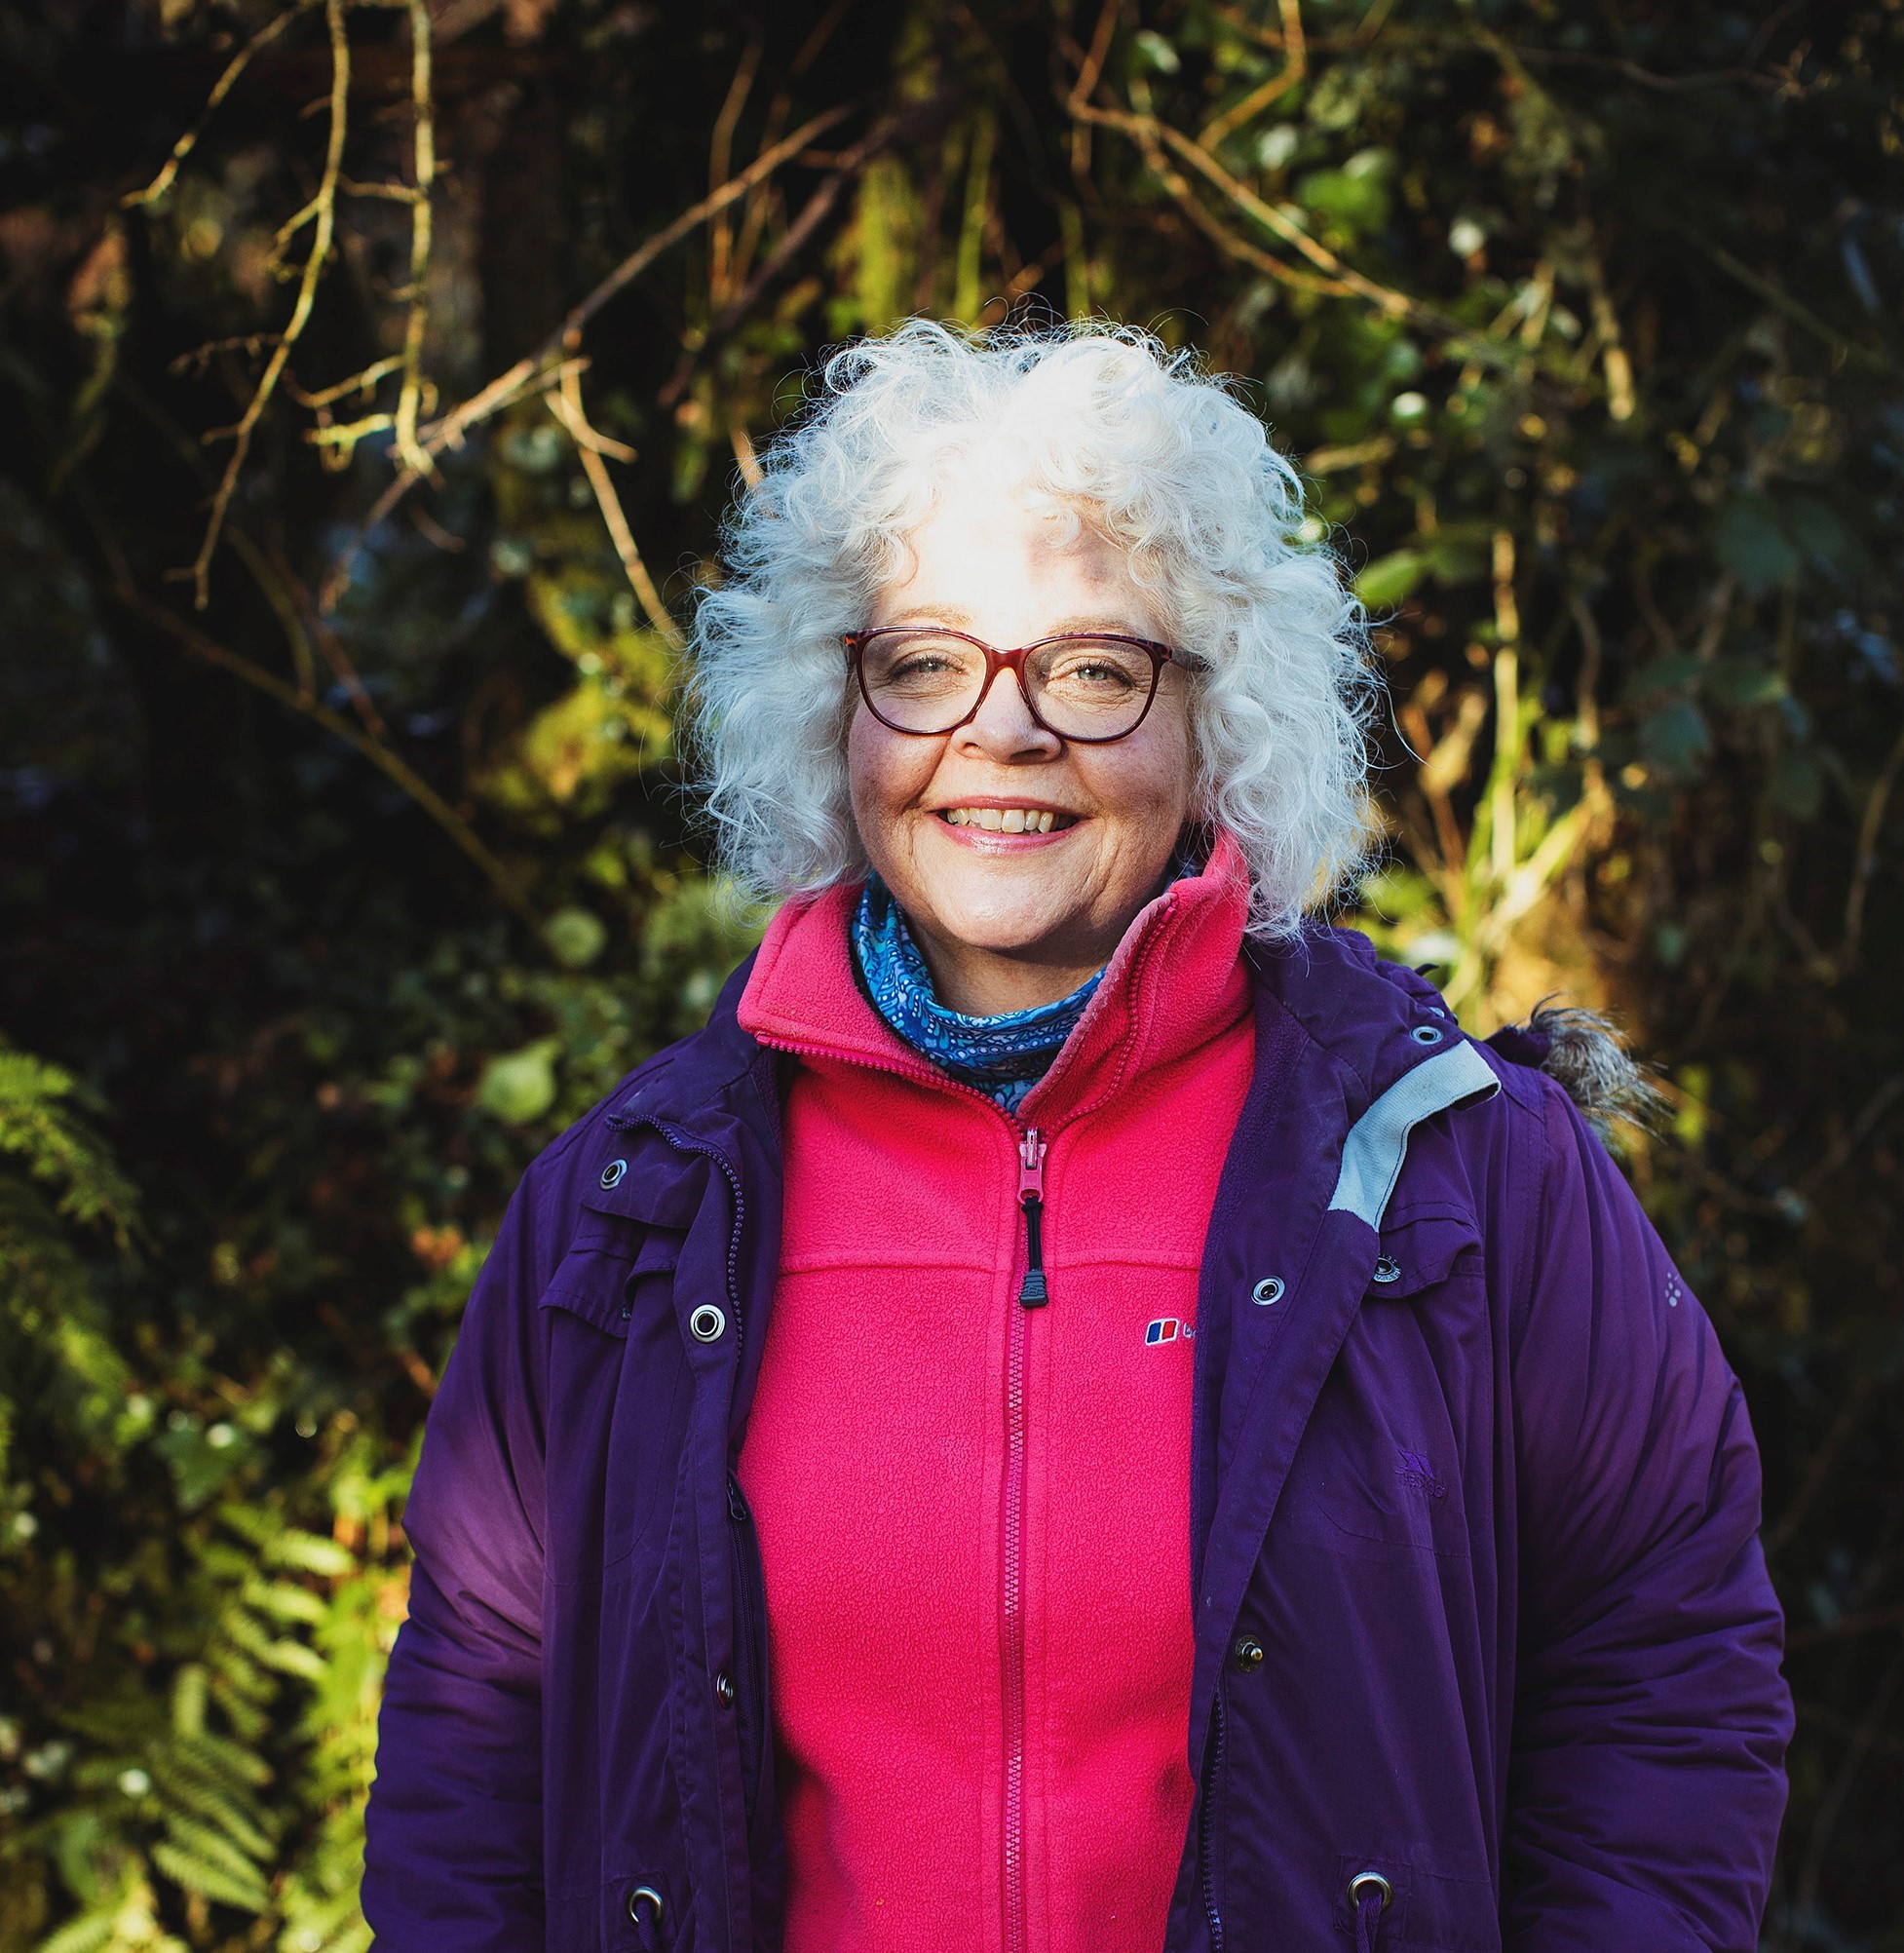 A colour photo of Chdel, a middle aged, smiling woman, with blond culy hair, glasses, and wearing out door clothes. She is standing in a wood in a path of sunlight.